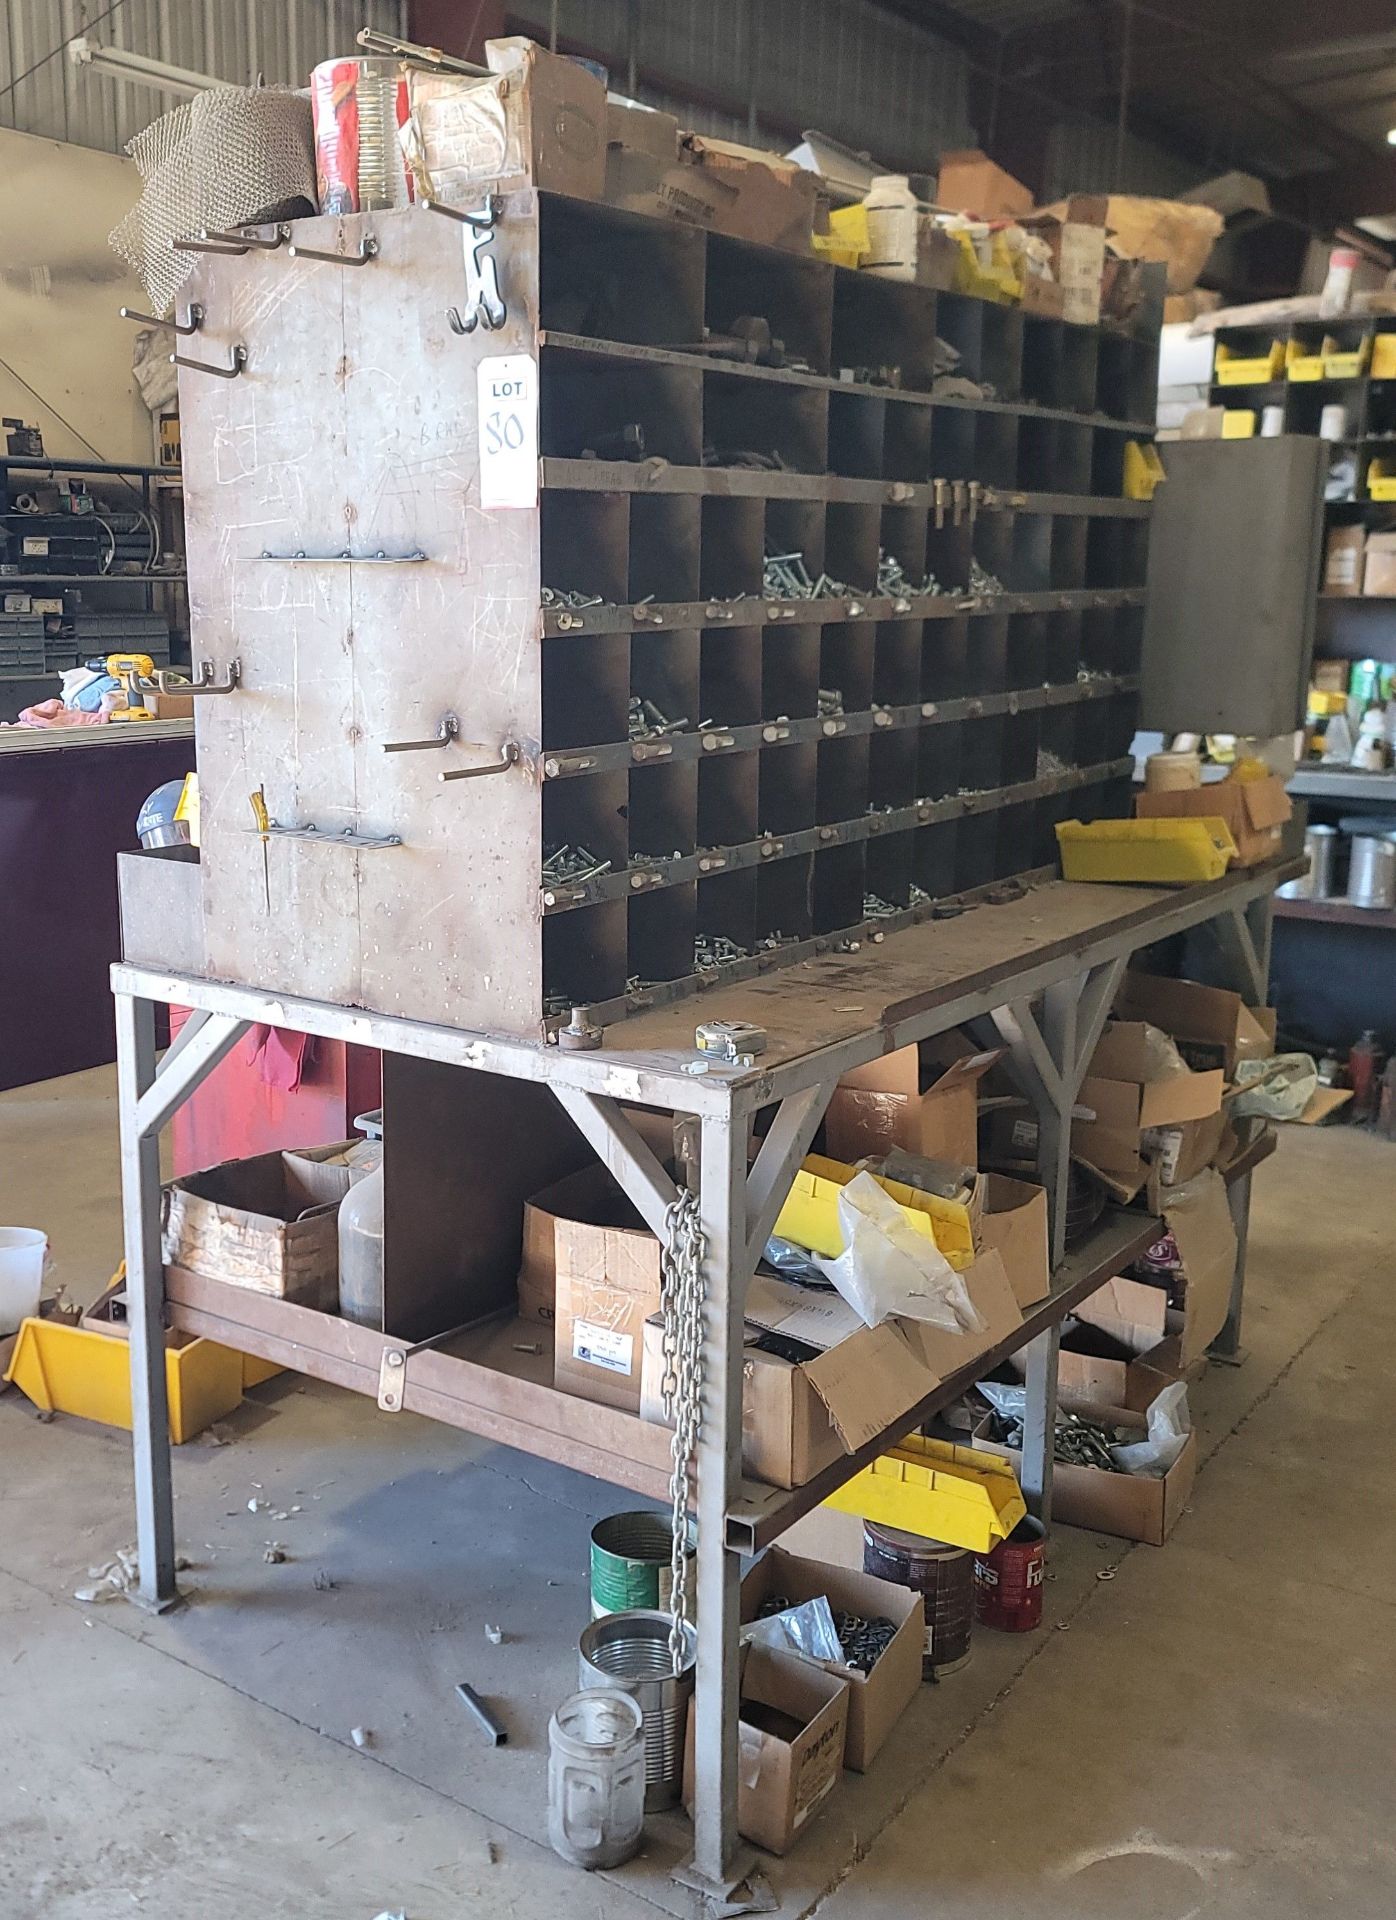 HARDWARE STORAGE TABLE W/ TWO-SIDED CUBBY HOLE UNIT WELDED TO TABLE, 82" X 40" X 76" HT, CONTENTS OF